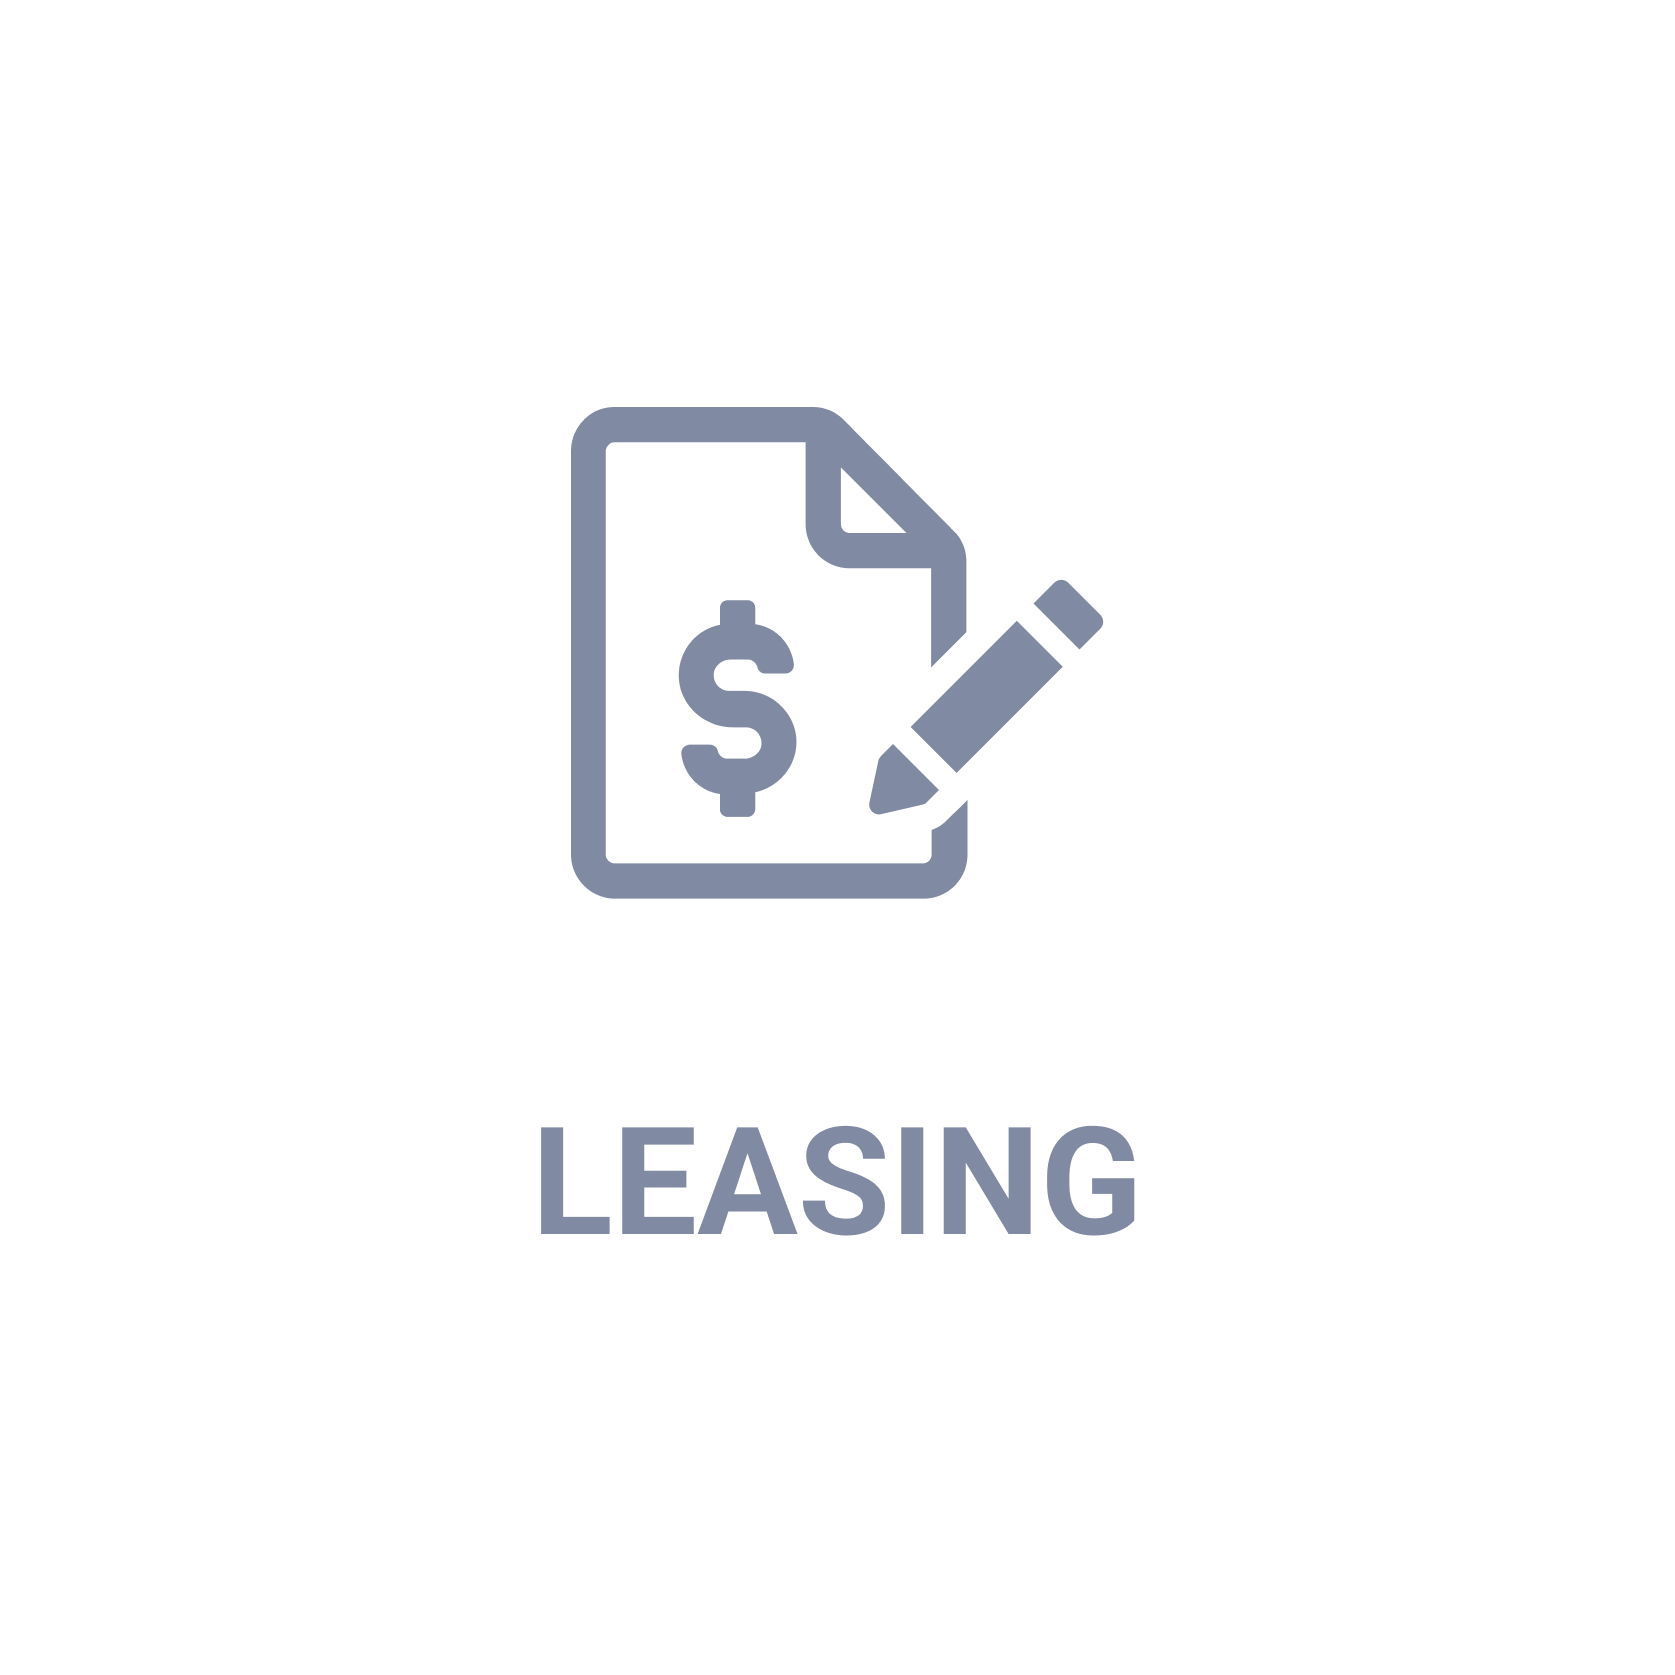 Security consulting - Leasing icon